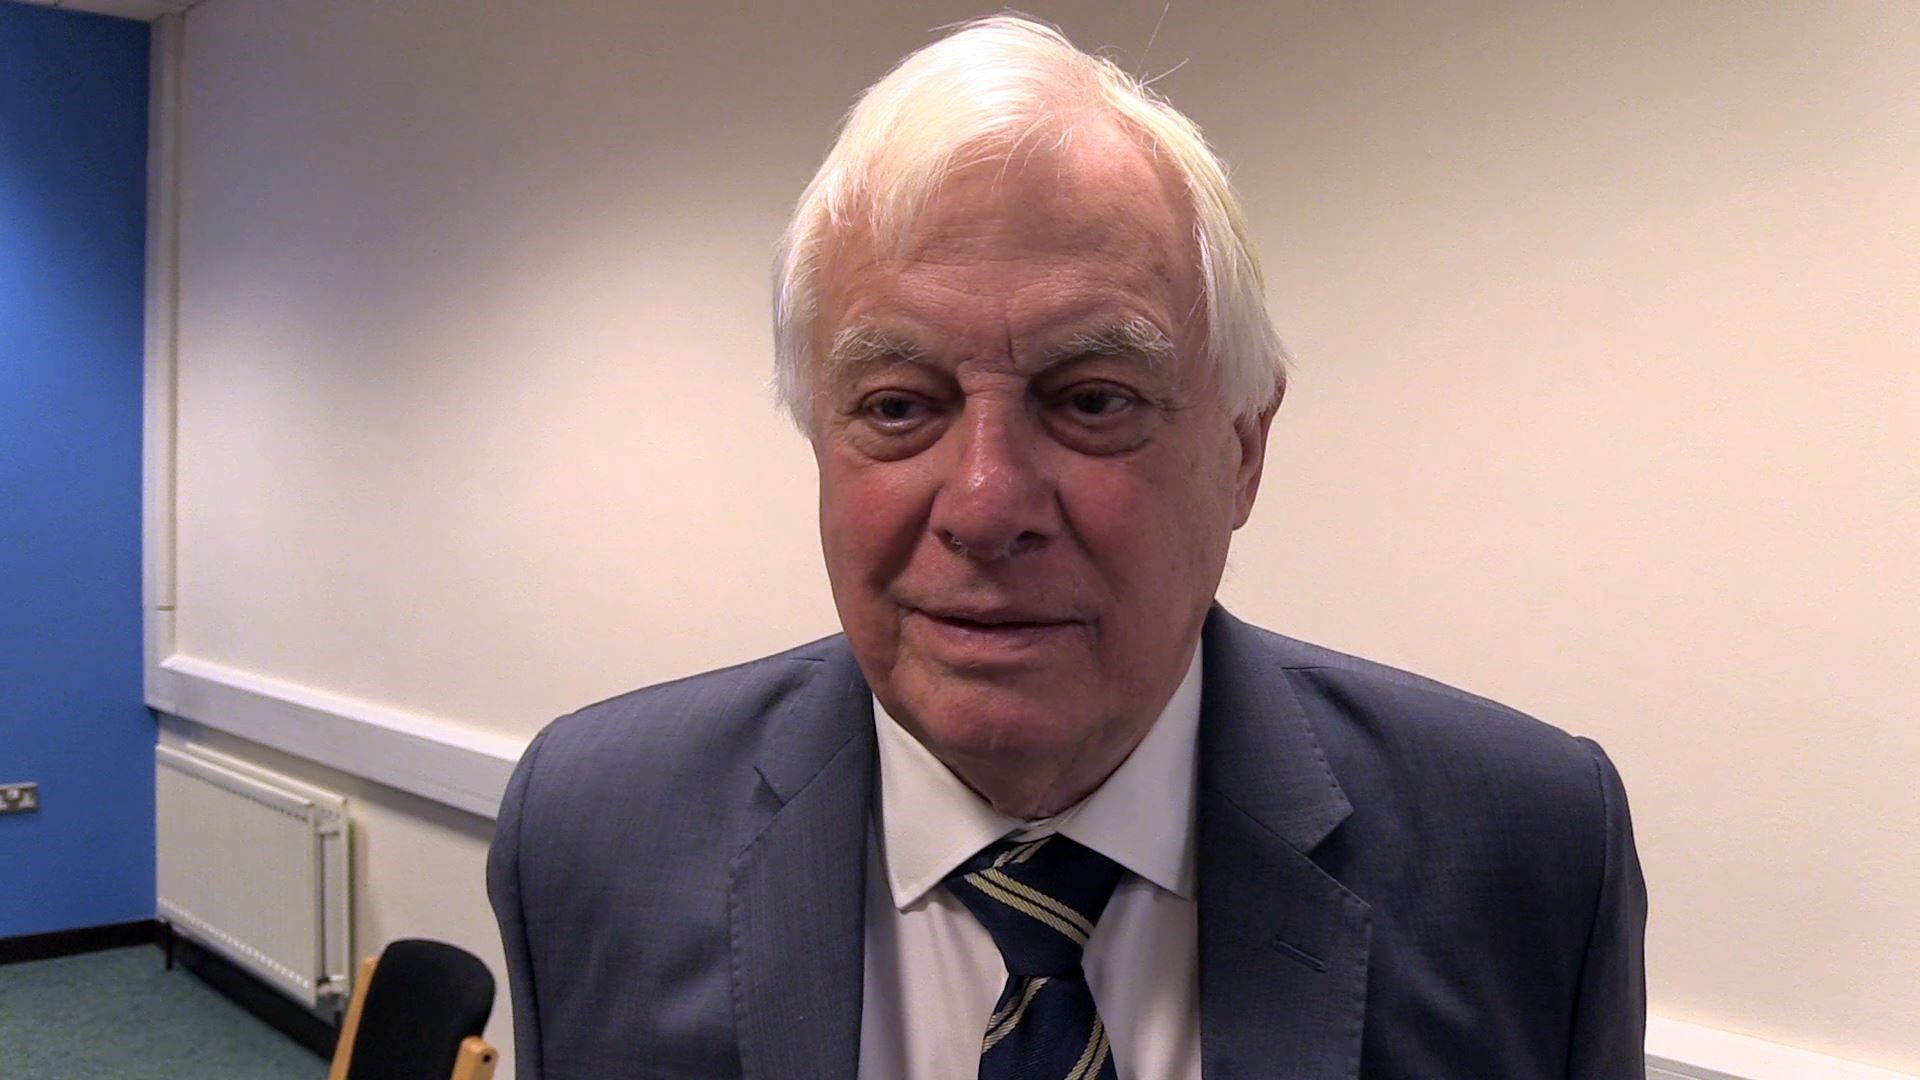 Lord Chris Patten said the UK would denounce the proposed protest laws if they had been introduced by the Chinese government (Michael McHugh/PA)